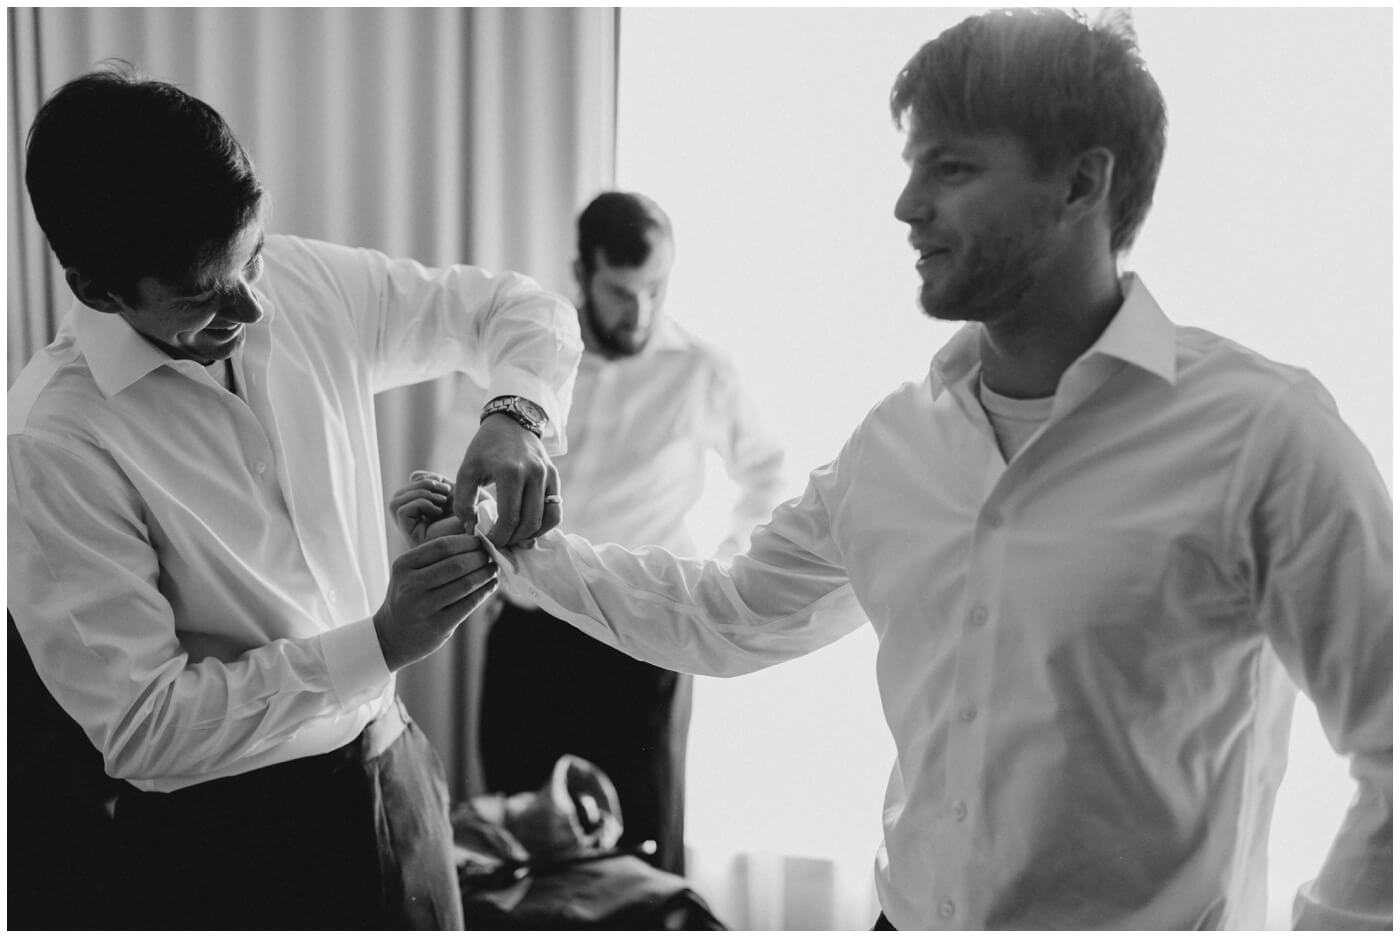 The groom gets ready on his wedding day